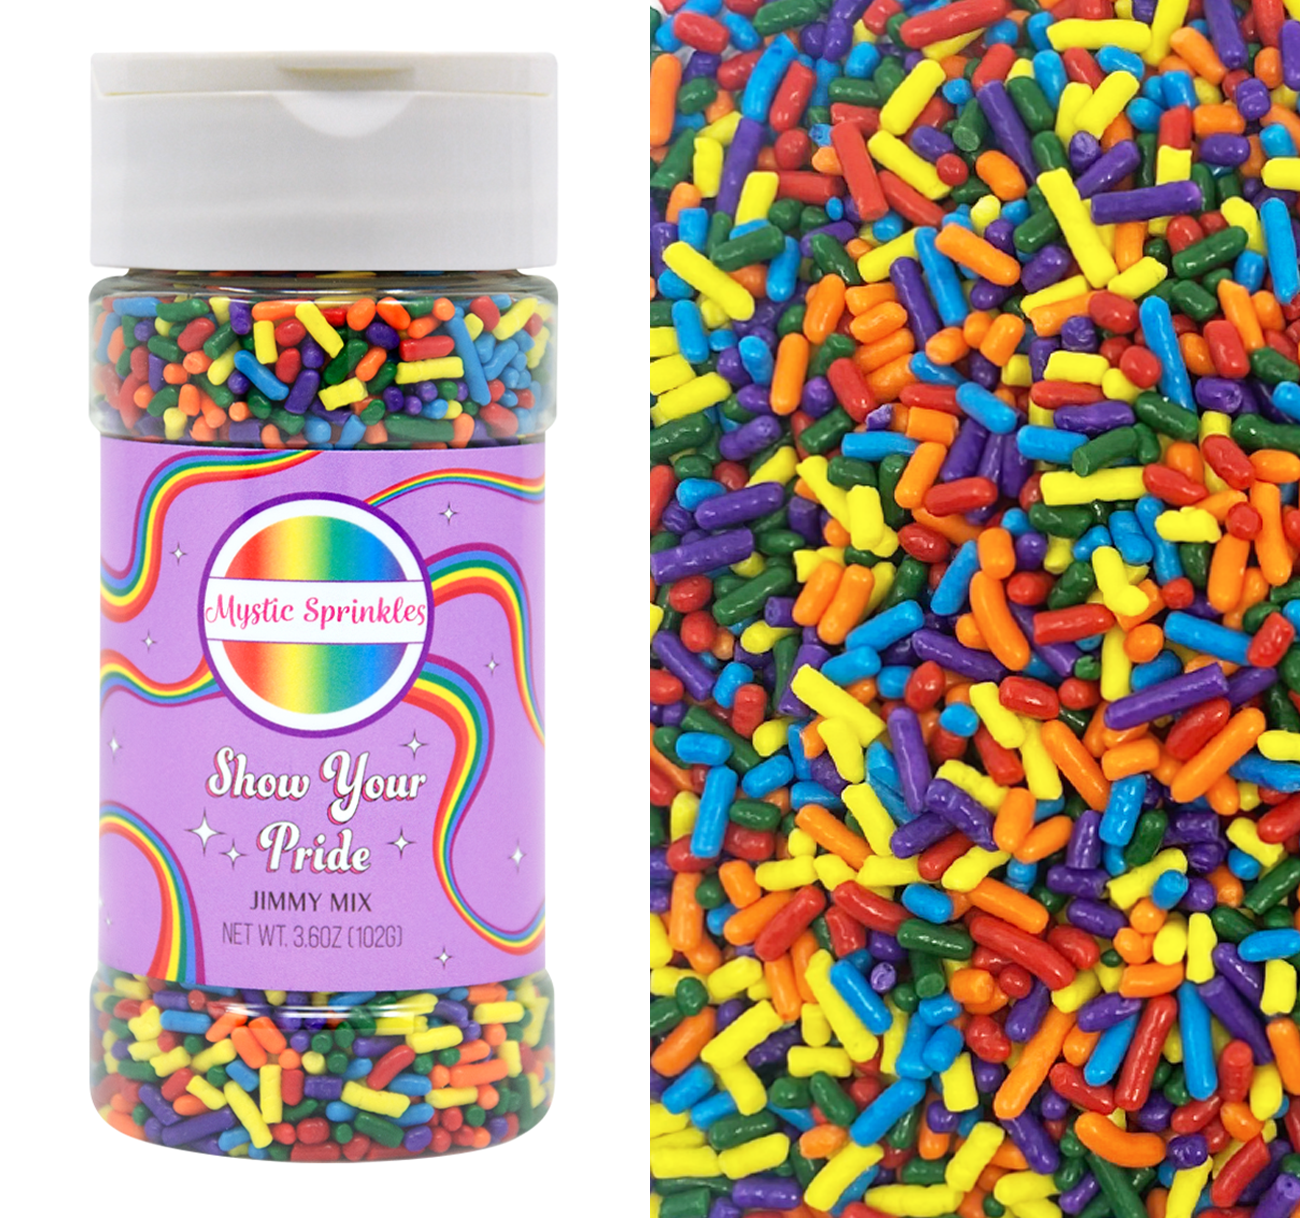 Show Your Pride Jimmy Mix 3.6oz